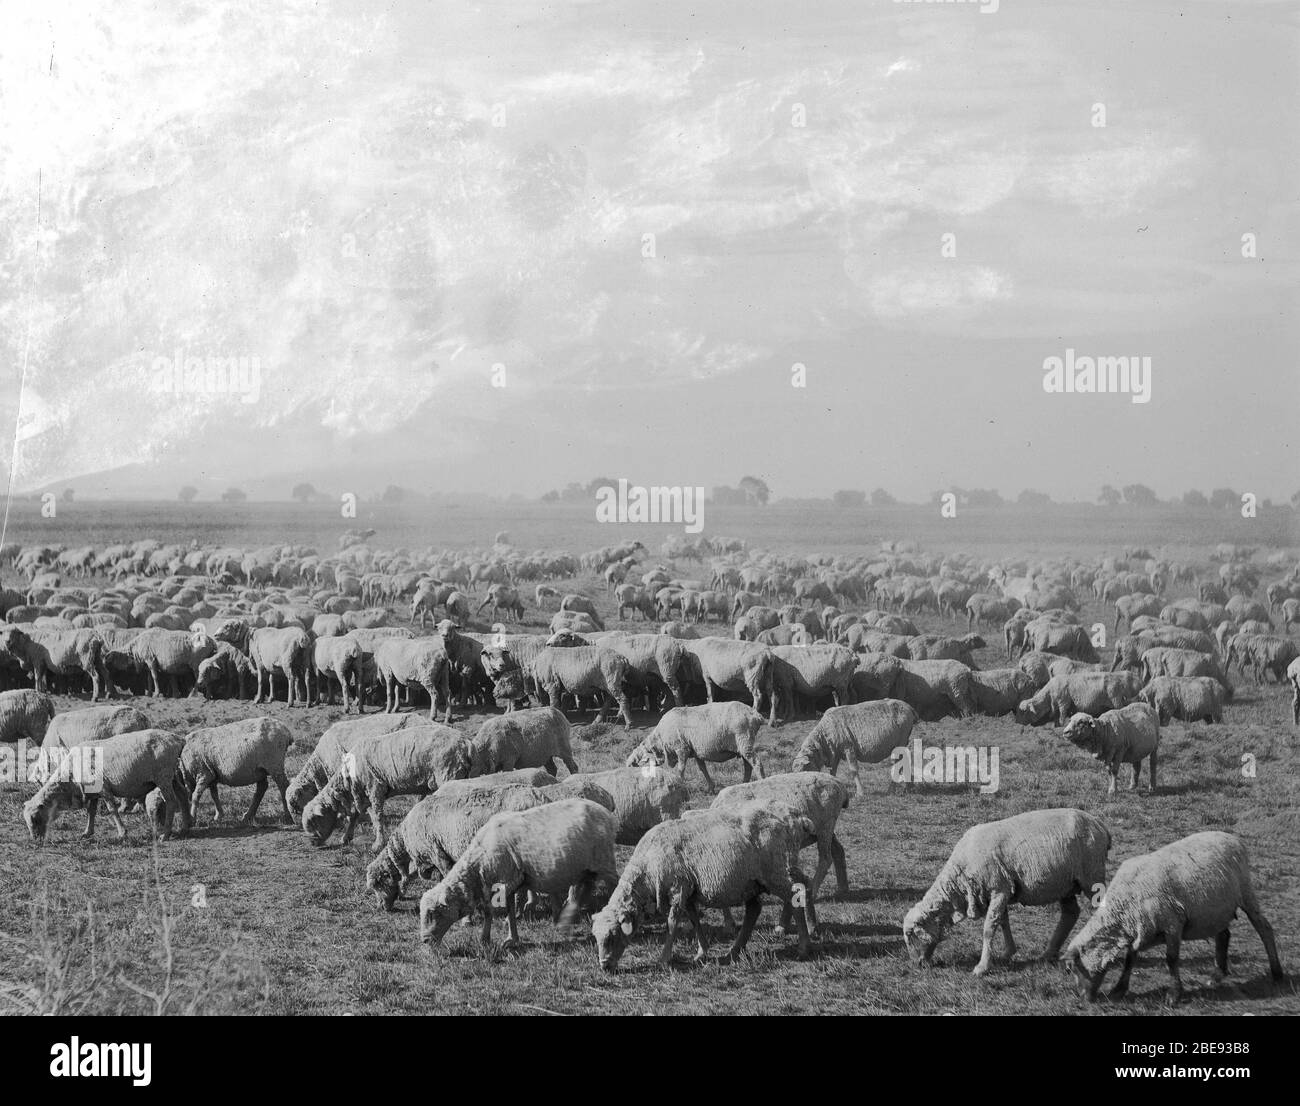 'English:  A flock of sheep grazing, ca.1900 Photograph of a flock of sheep grazing, ca.1900. Over a hundred sheep graze the plain fields. Trees are visible in the distance. Call number: CHS-5329 Filename: CHS-5329 Coverage date: circa 1900 Part of collection: California Historical Society Collection, 1860-1960 Type: images Part of subcollection: Title Insurance and Trust, and C.C. Pierce Photography Collection, 1860-1960 Repository name: USC Libraries Special Collections Format: glass plate negatives Archival file: chs Volume69/CHS-5329.tiff Repository address: Doheny Memorial Library, Los An Stock Photo